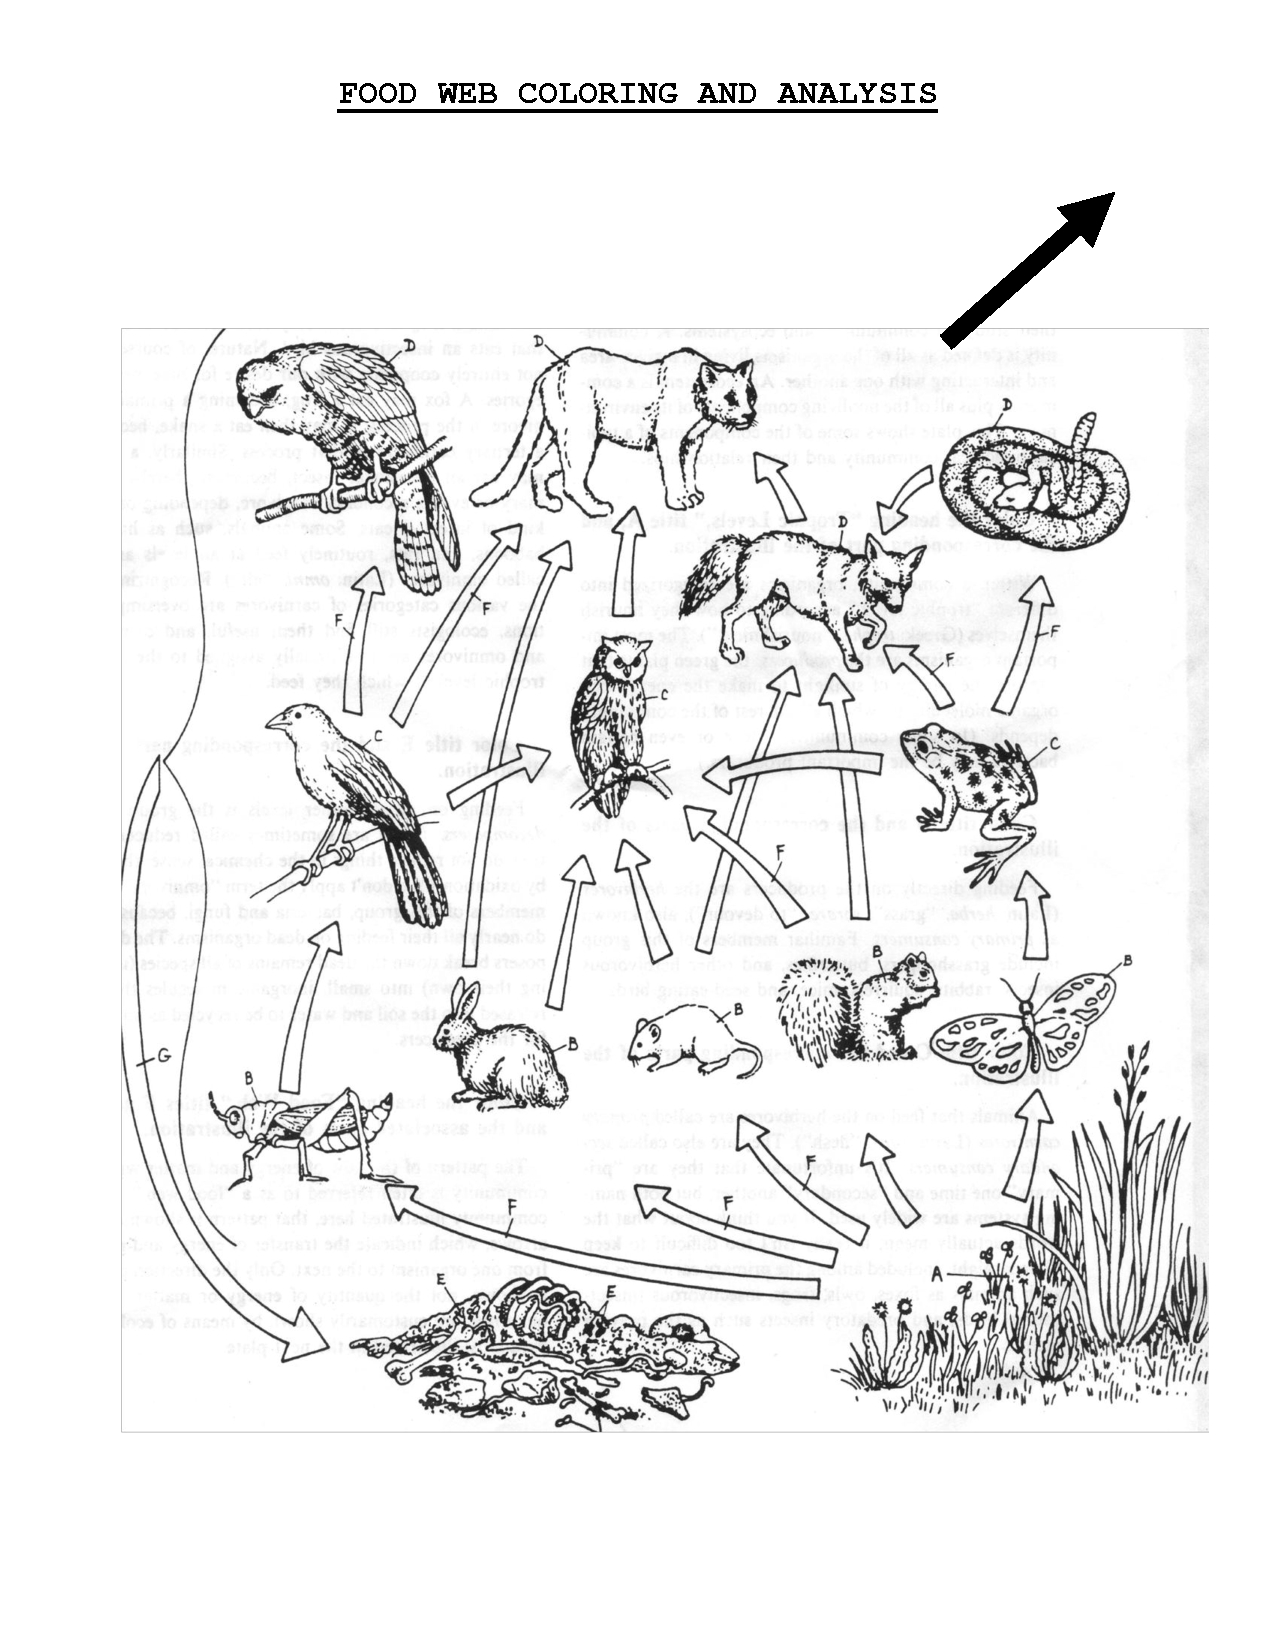 Food Web Coloring Sheet | Scope Of Work Template | Teach Throughout Blank Food Web Template